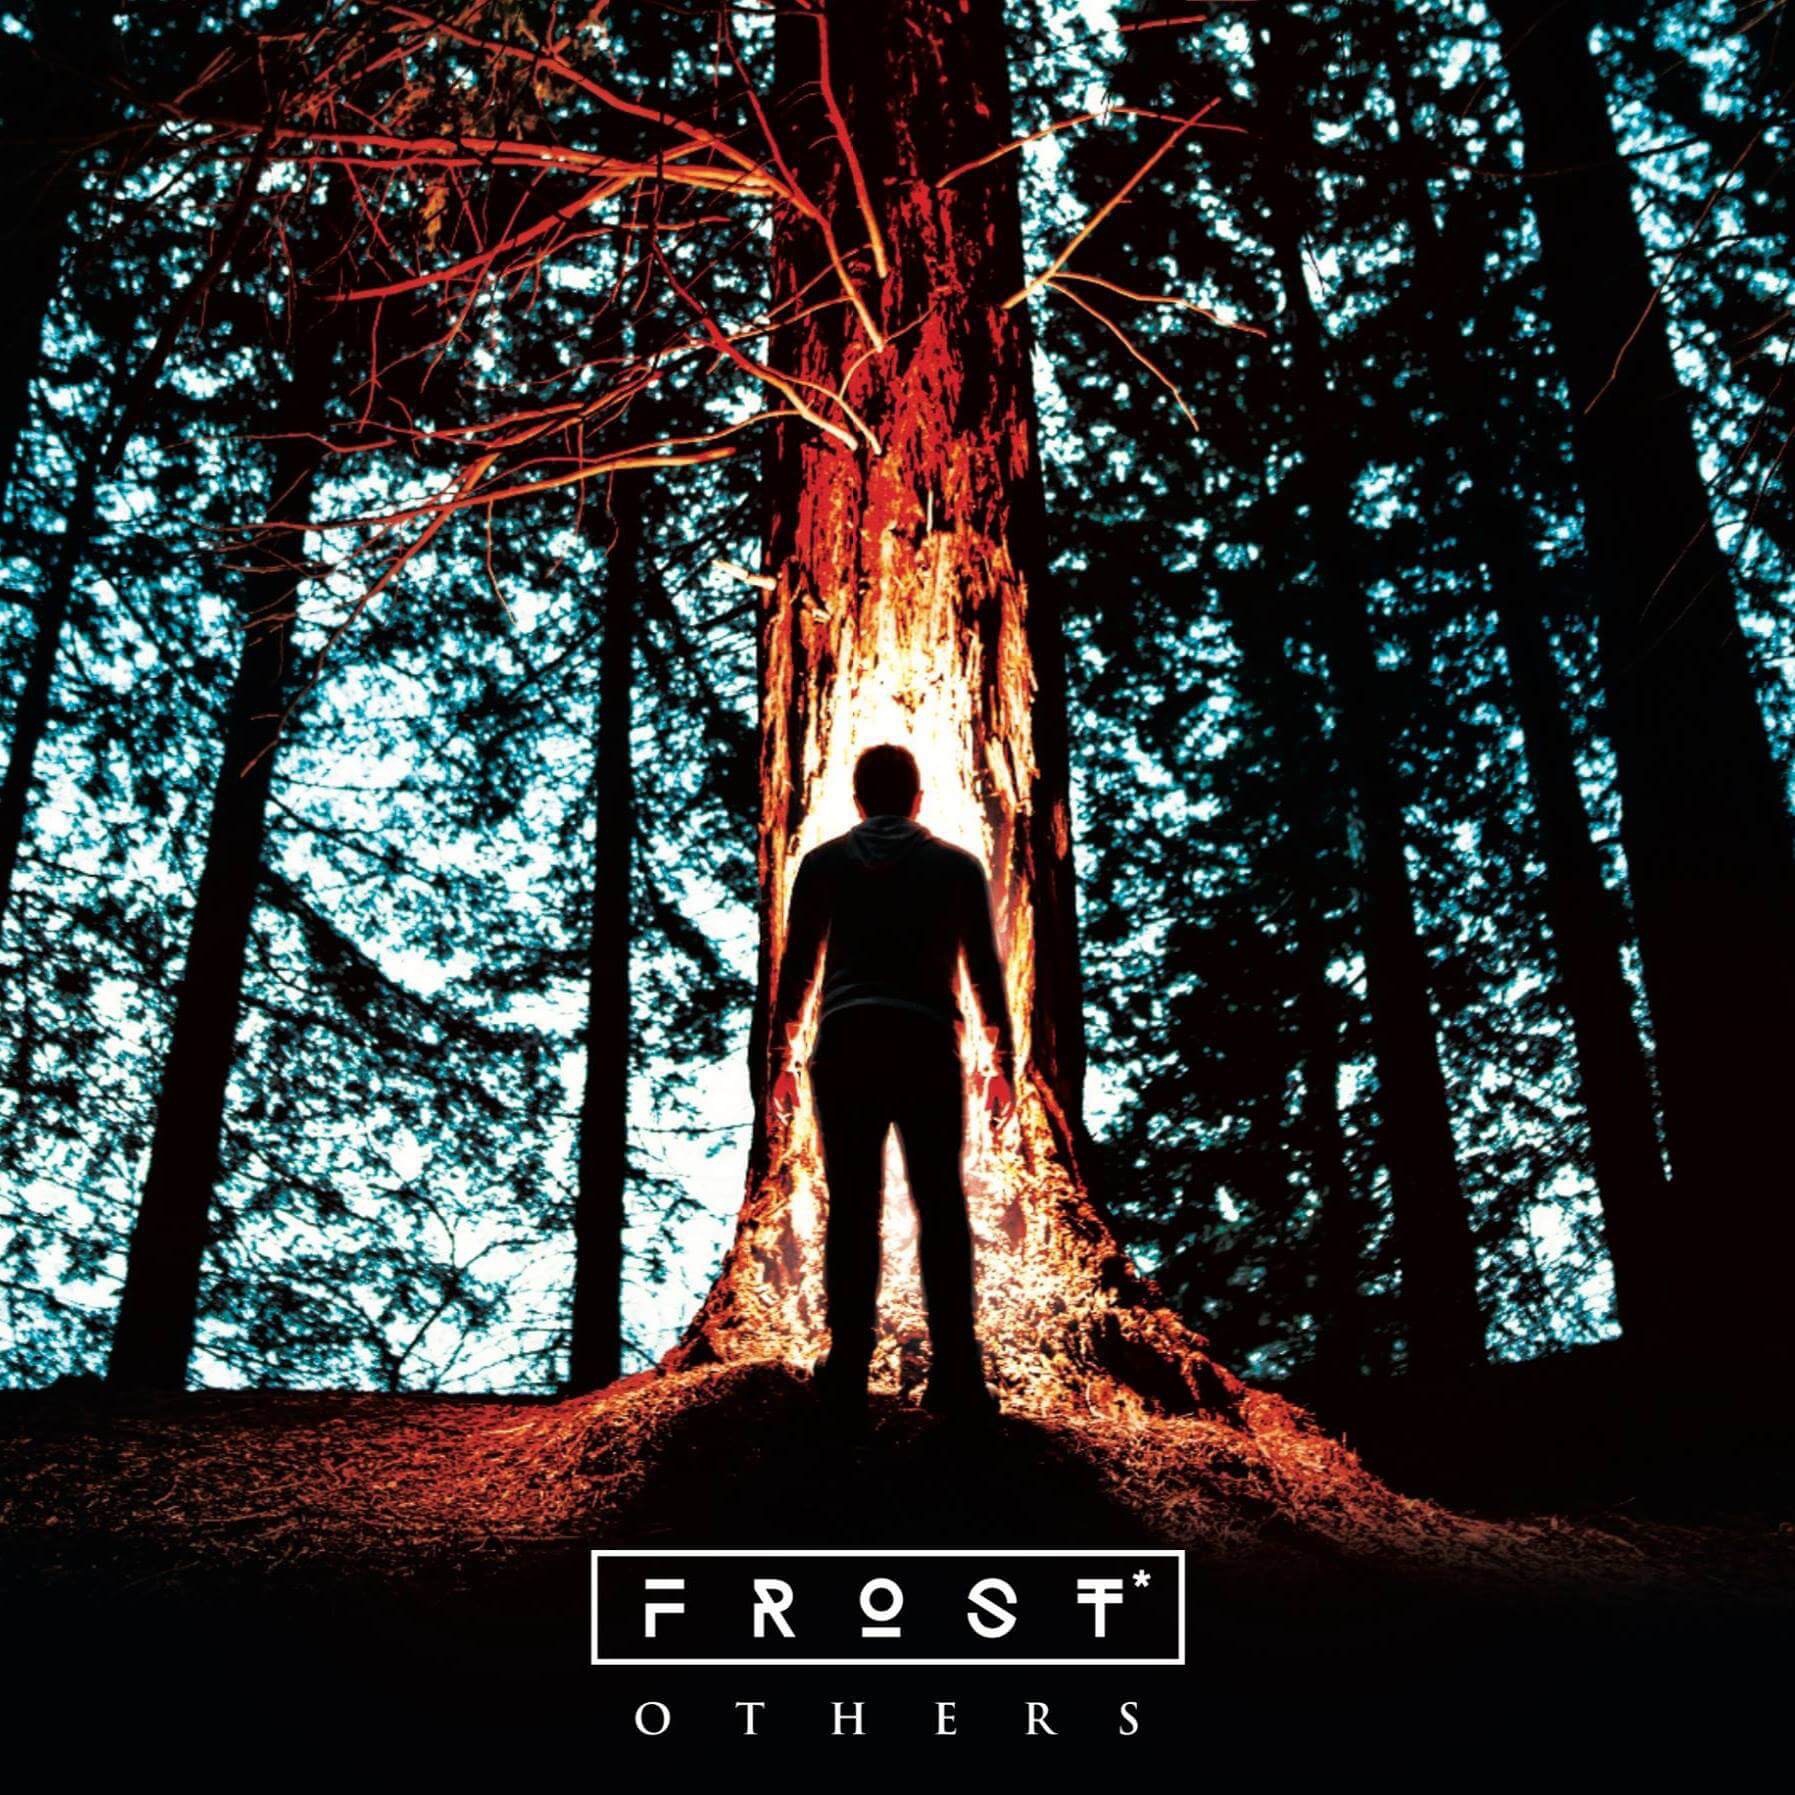 Album cover: Frost, “Others”